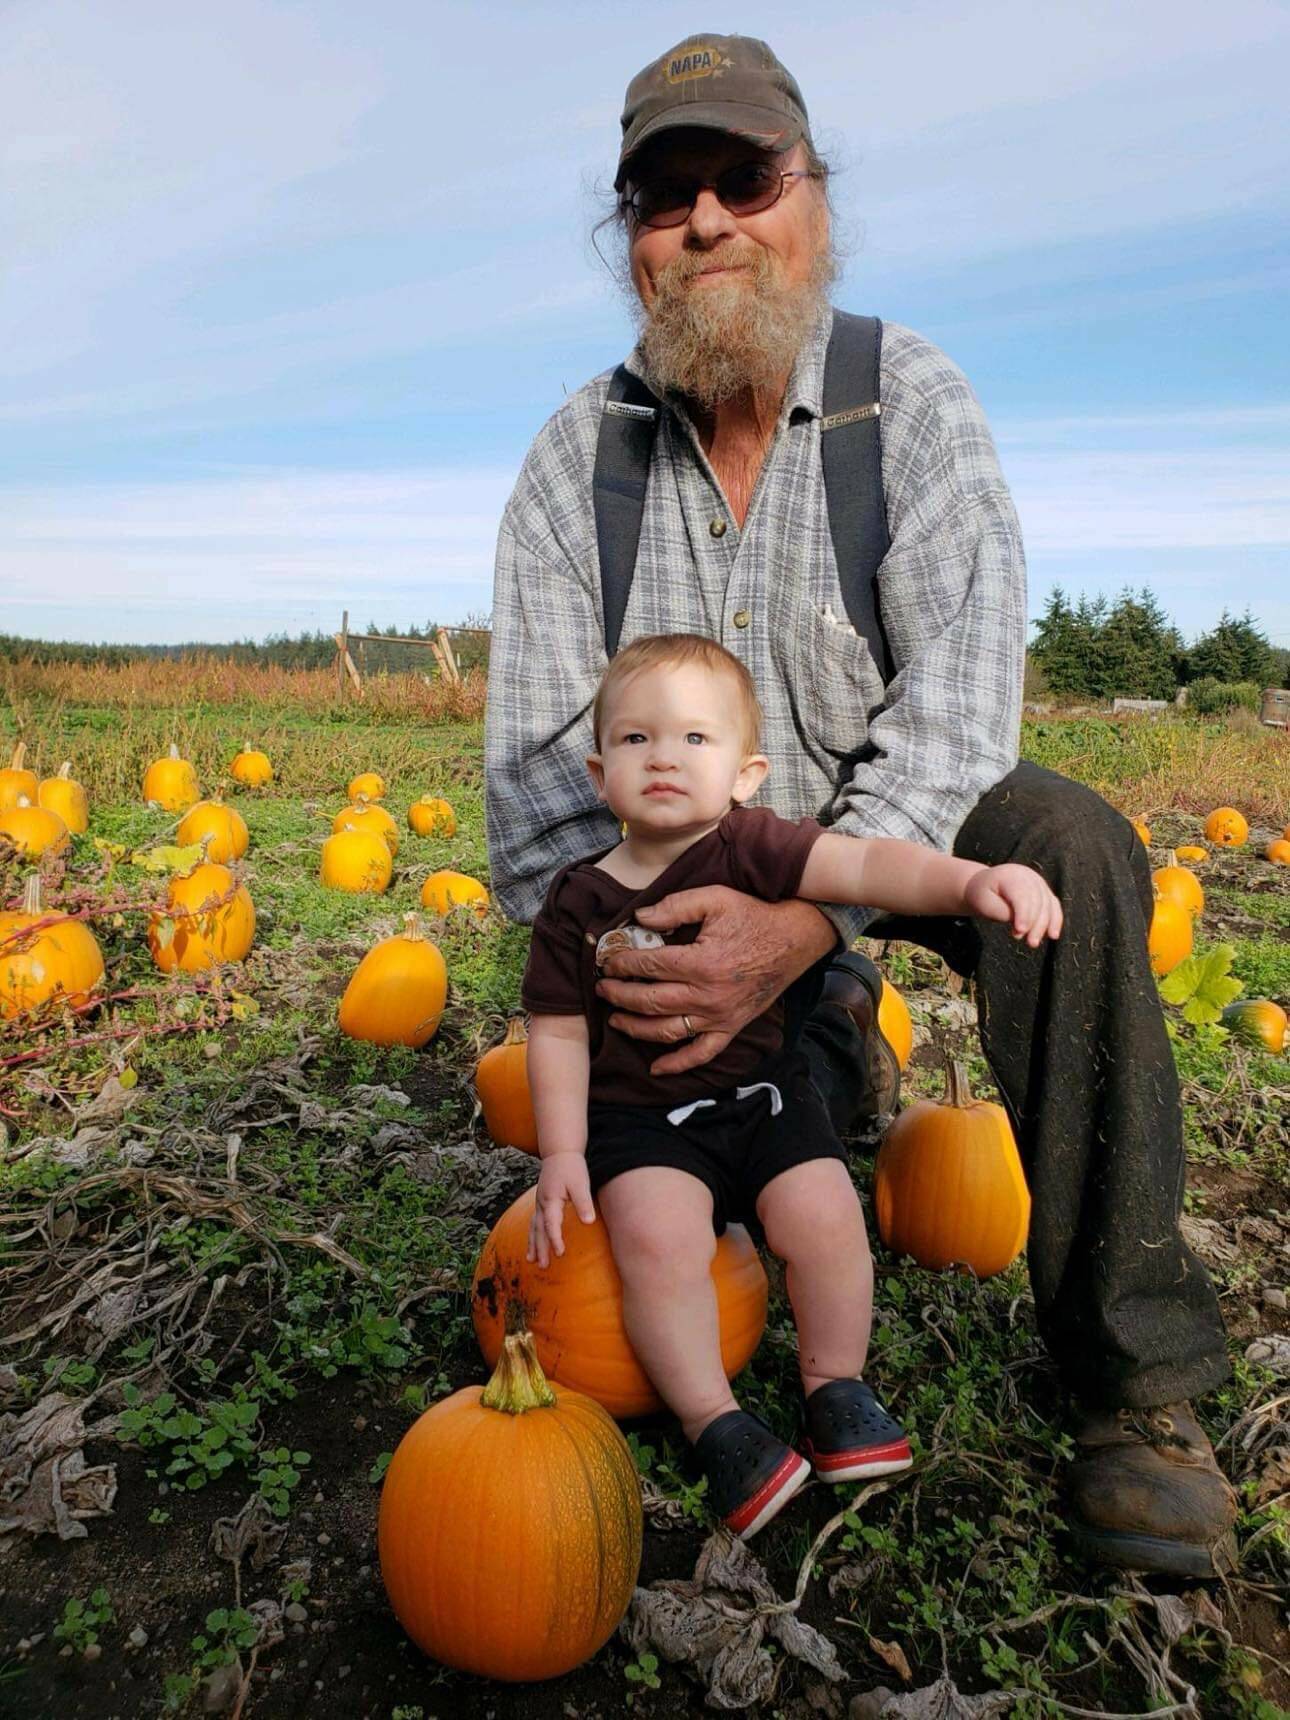 Mike Case-Smith introduces his grandson, Dean, to the pumpkin patch. (Photo provided)